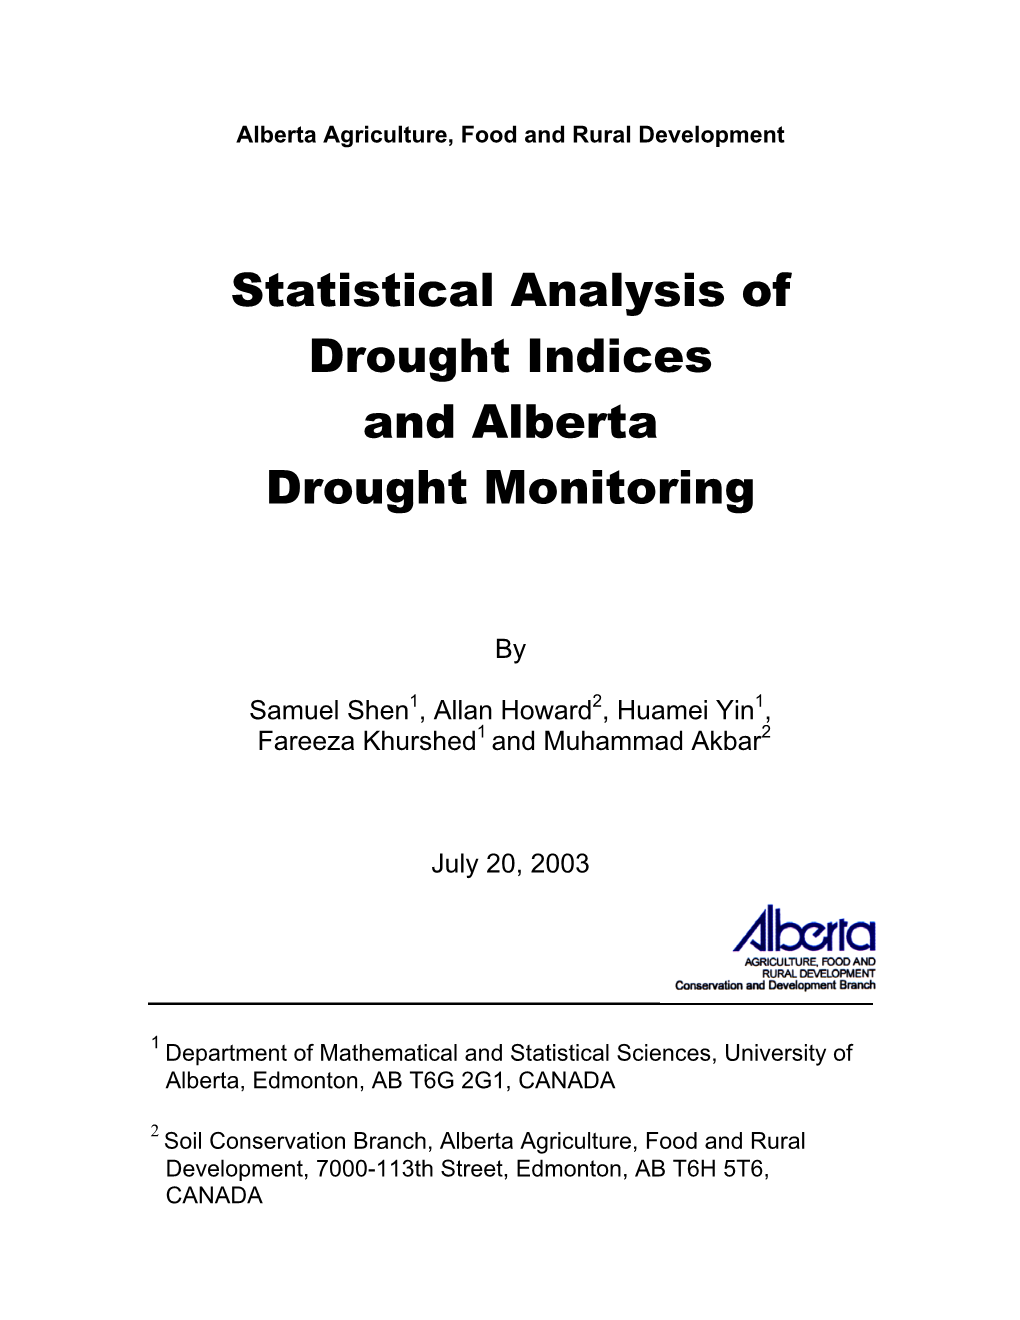 Statistical Analysis of Drought Indices and Alberta Drought Monitoring